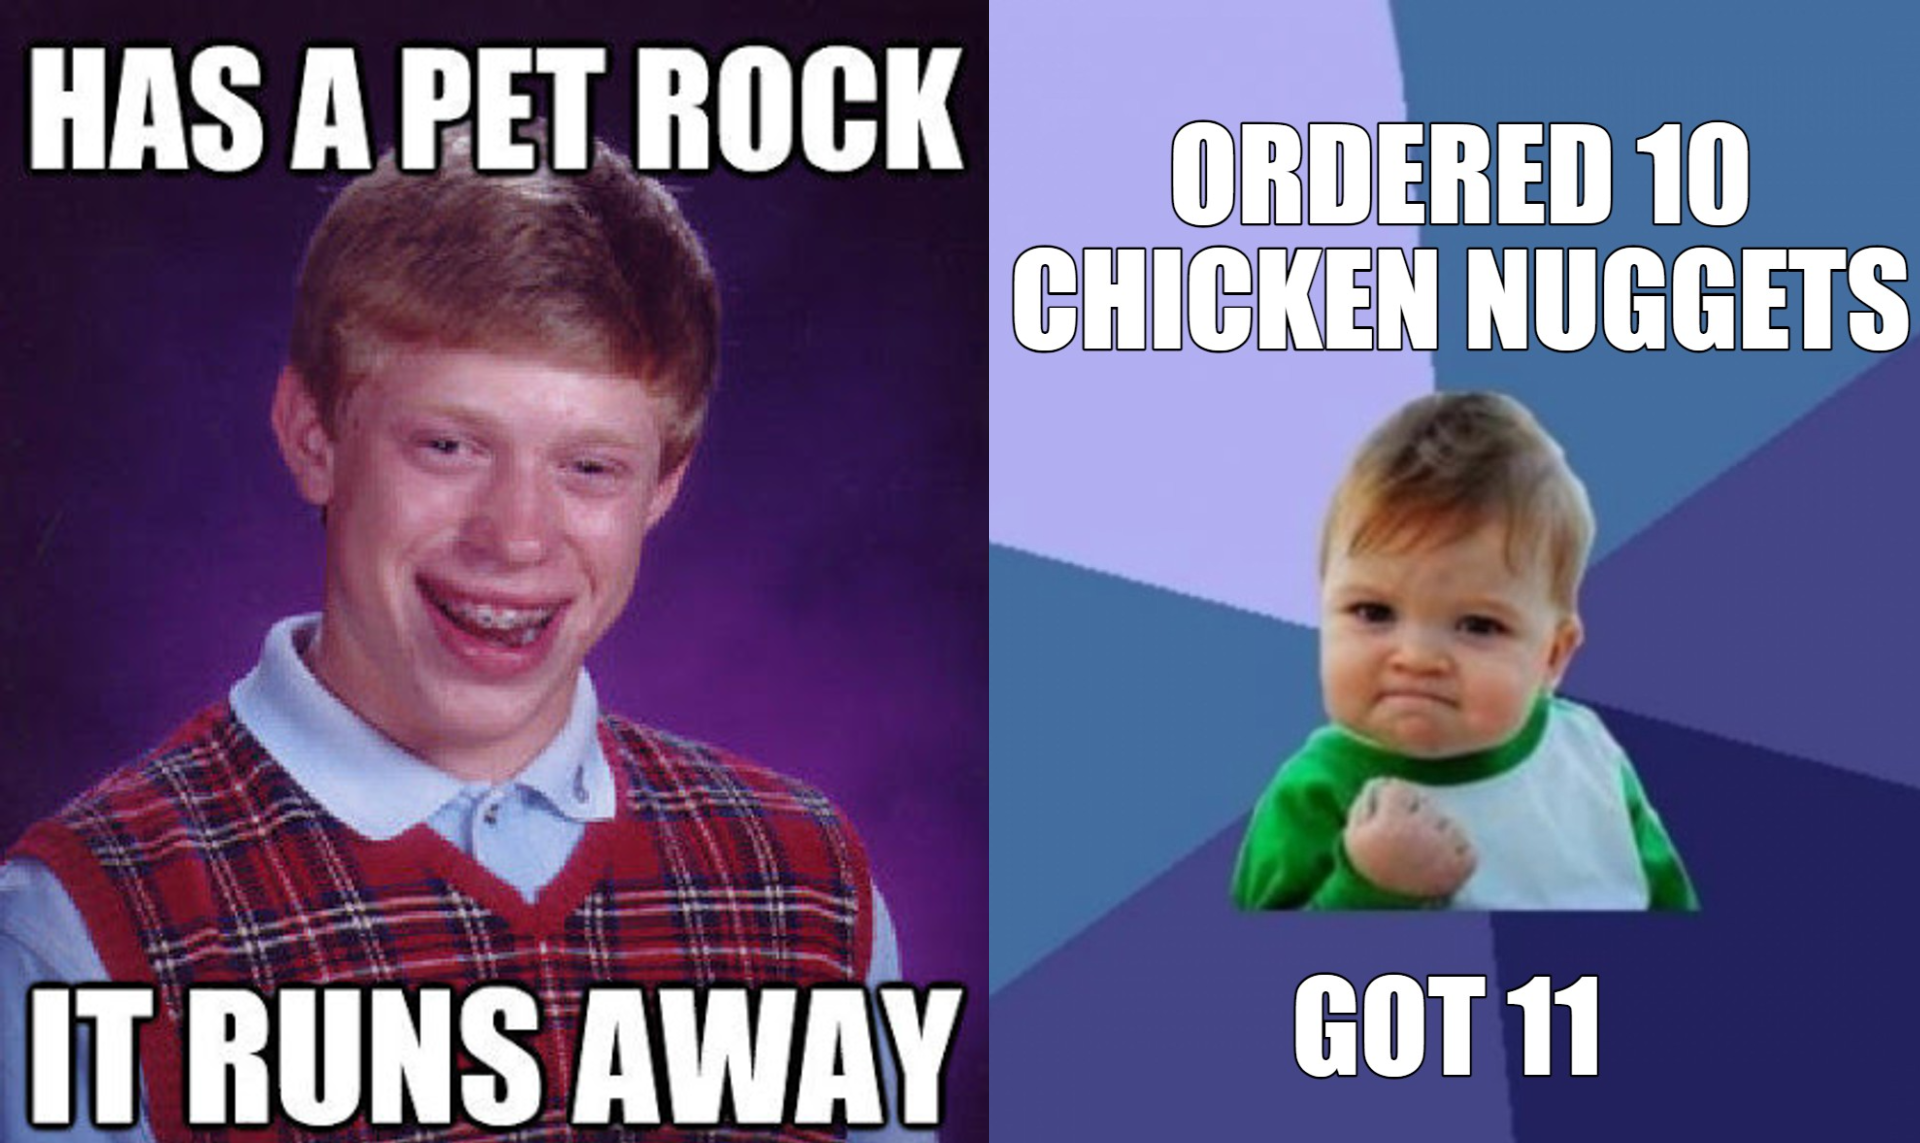 bad luck brian on the left, success kid on the right.